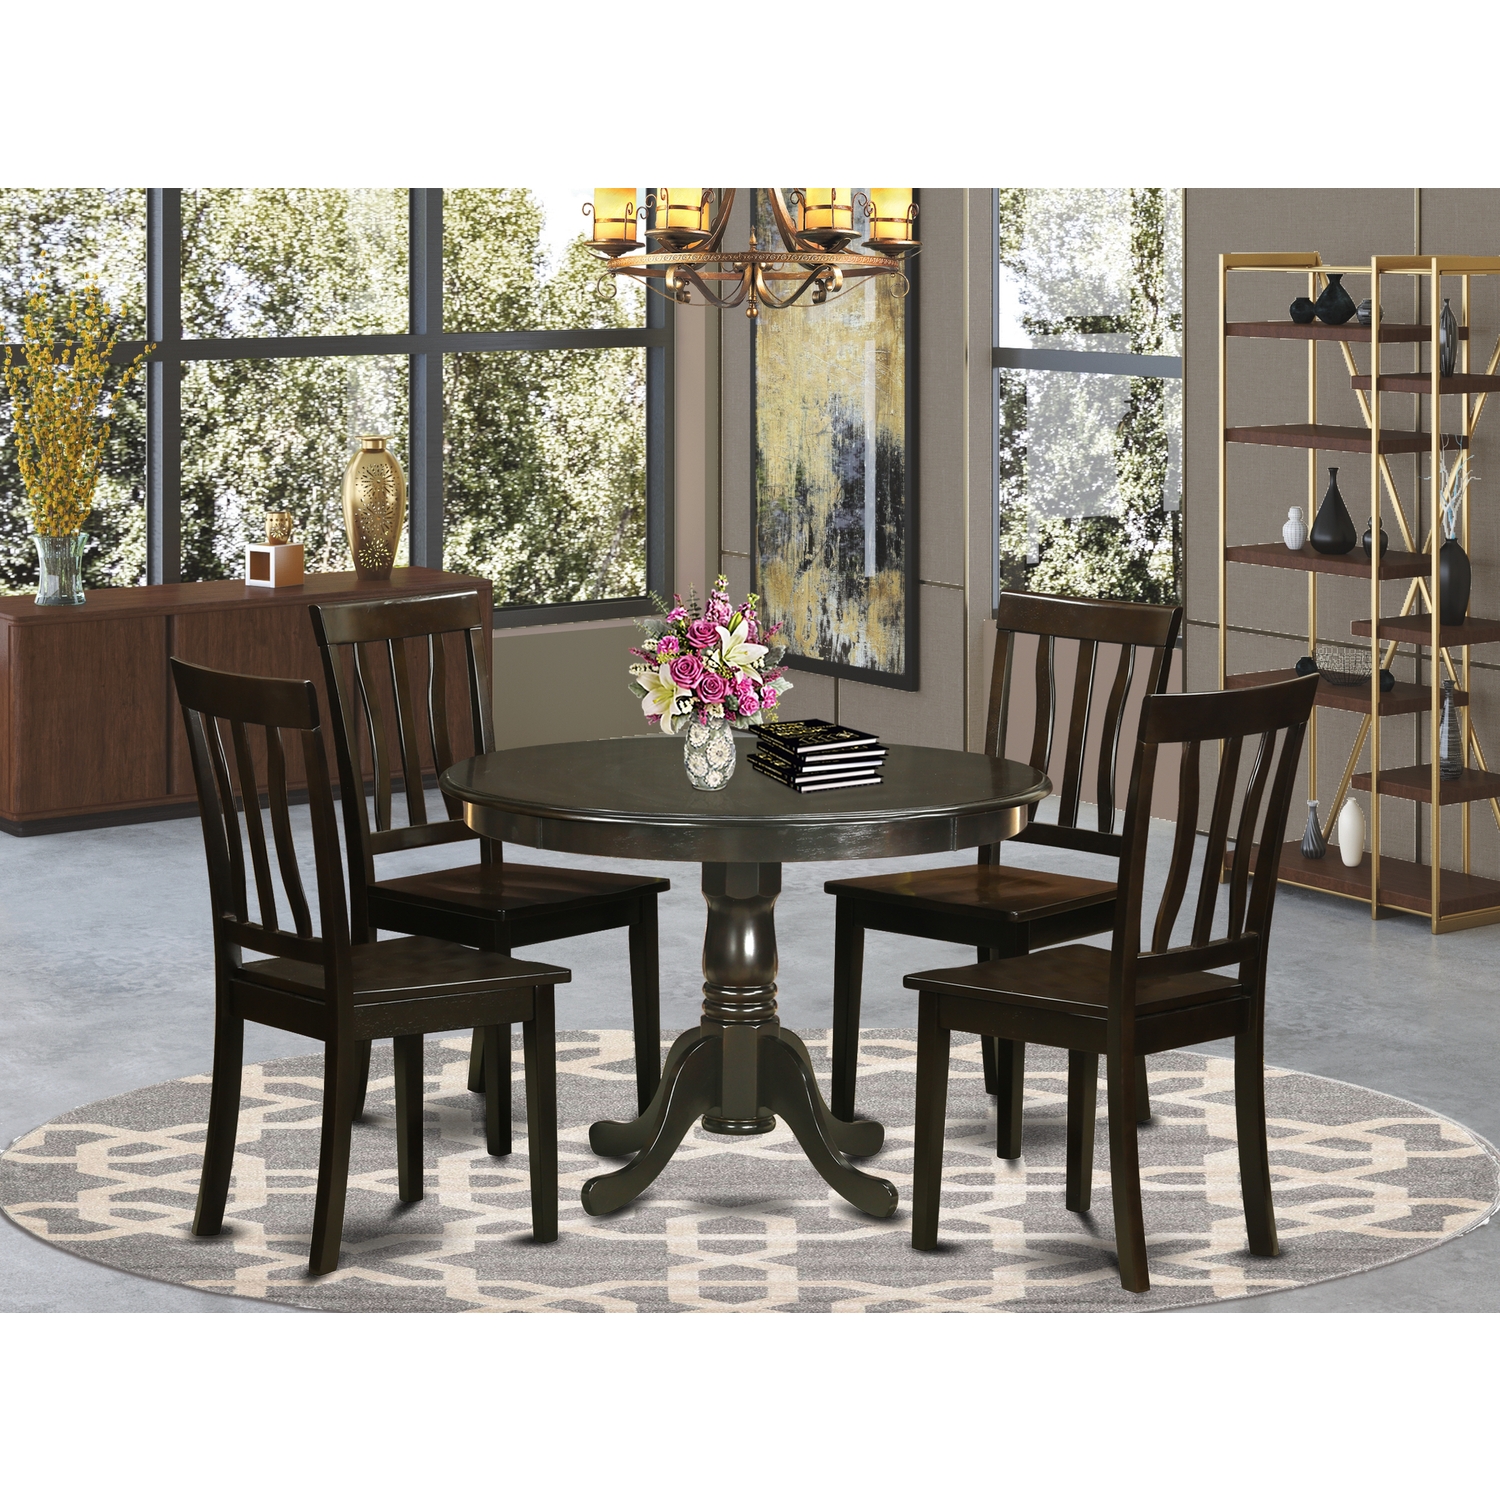 5 Pc Kitchen Table set- Table and 4 dinette Chairs. - image 1 of 5